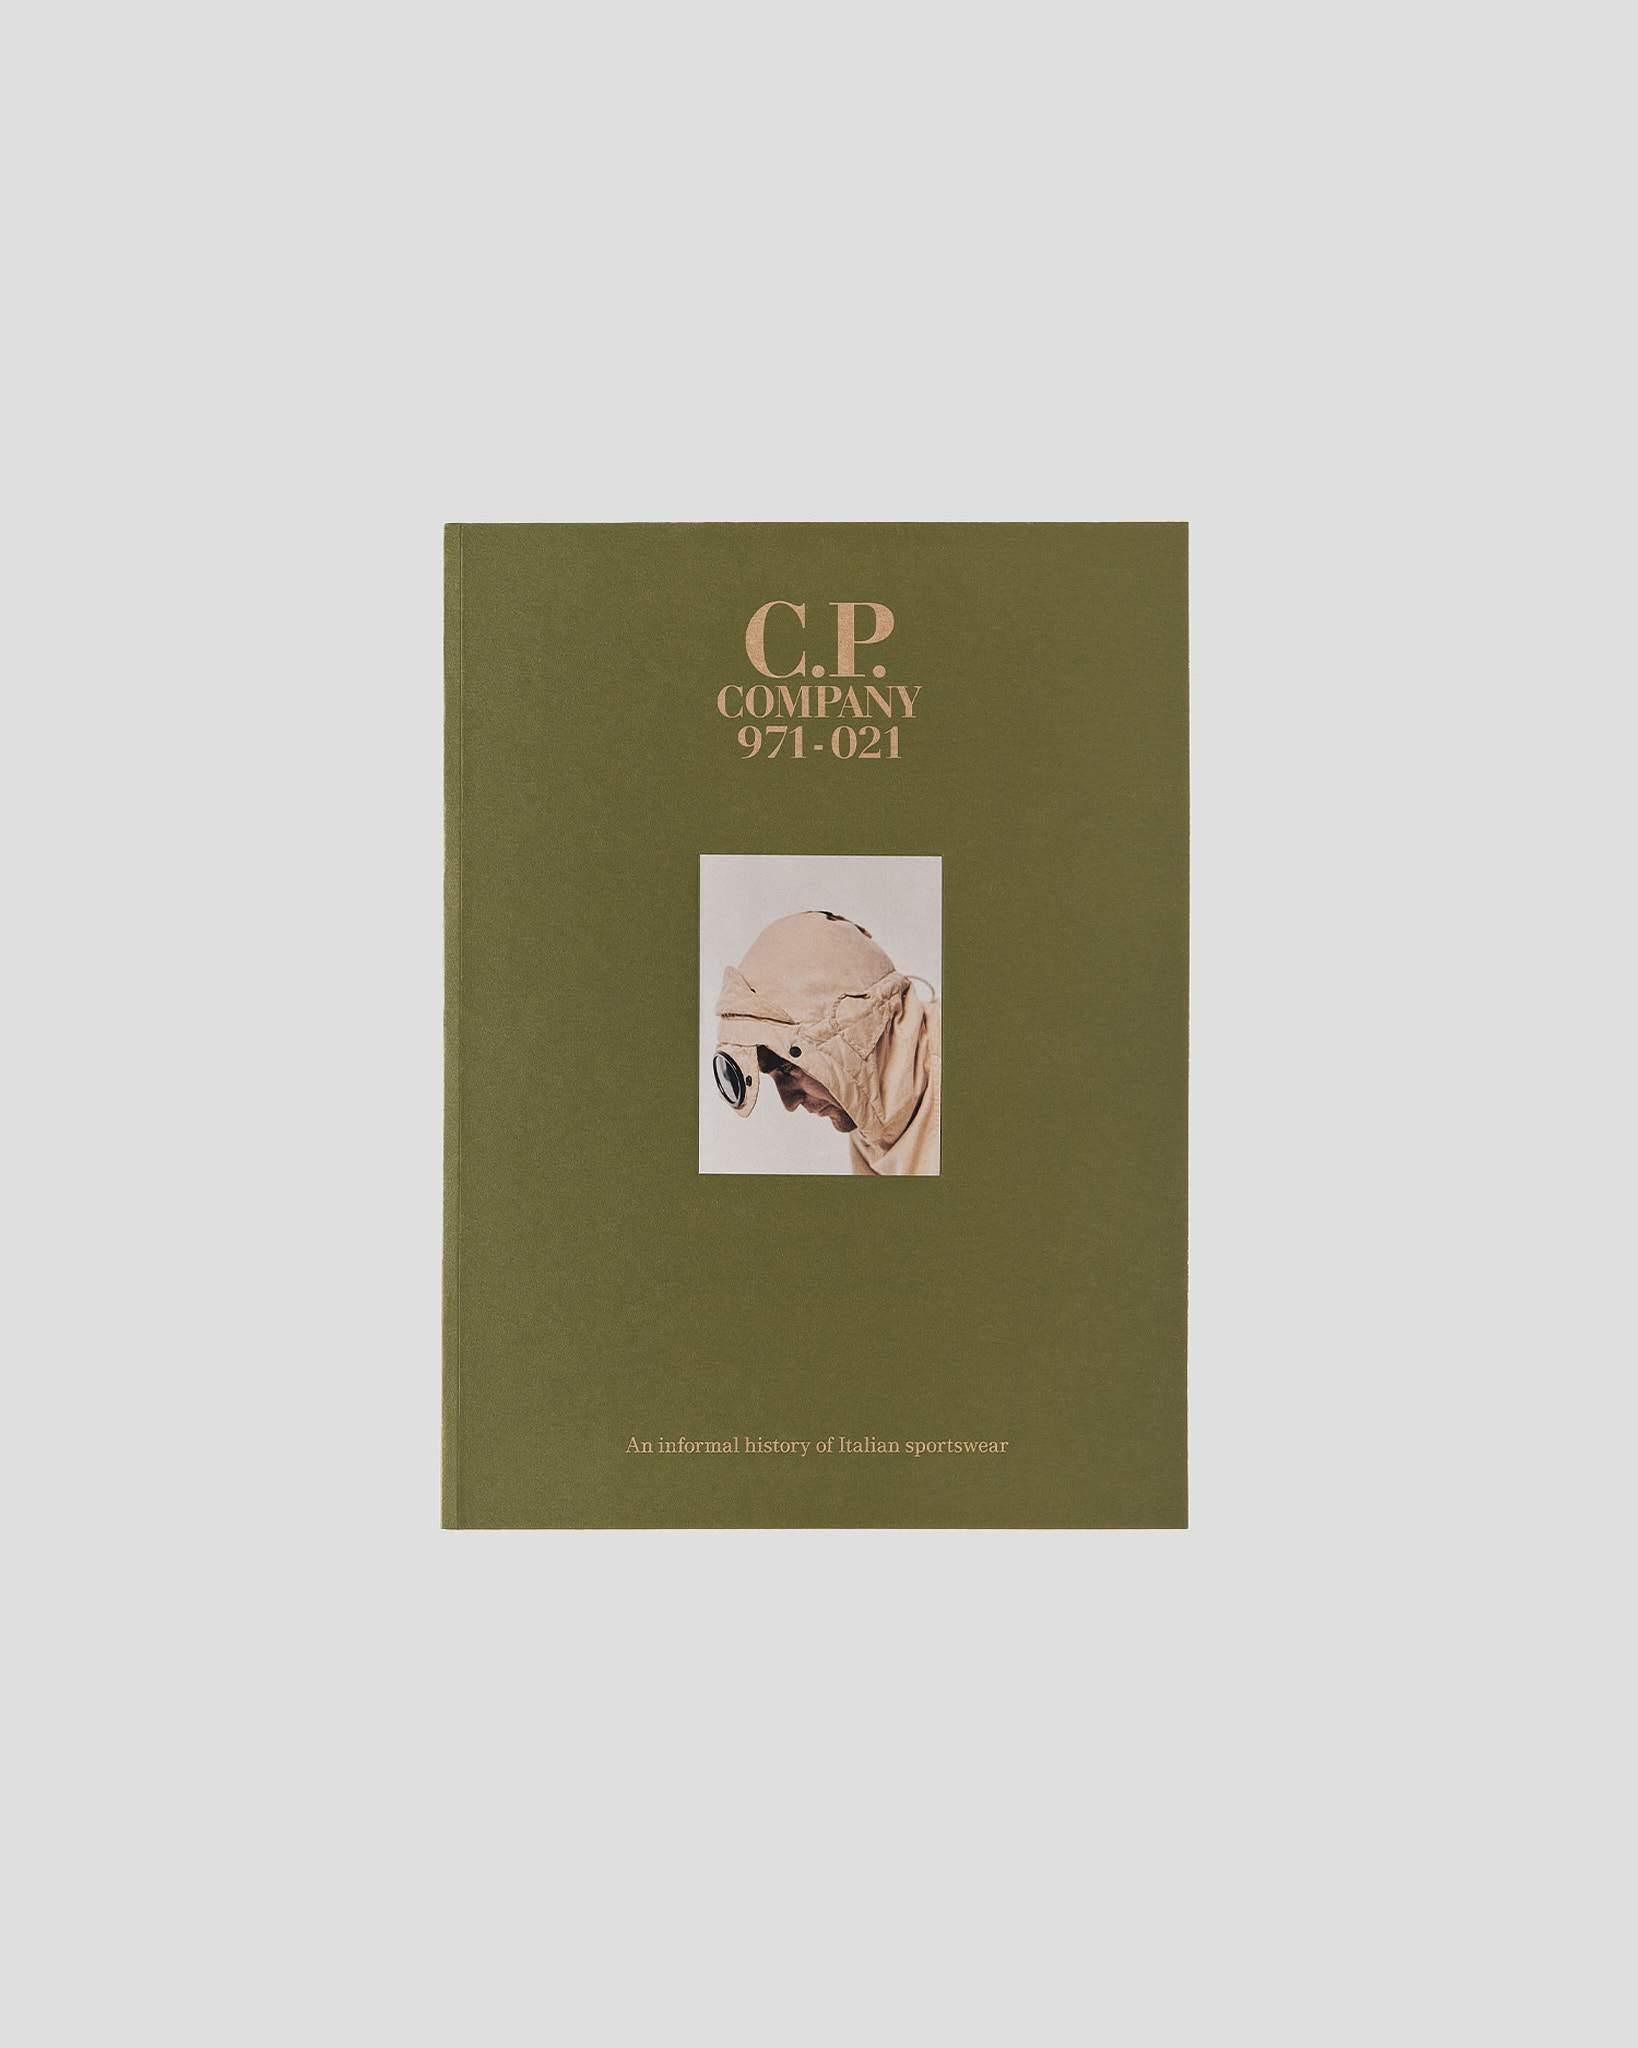 C.P. Company 971-021. An Informal History of Italian Sportswear - {{ collection.title }} - Chinatown Country Club 